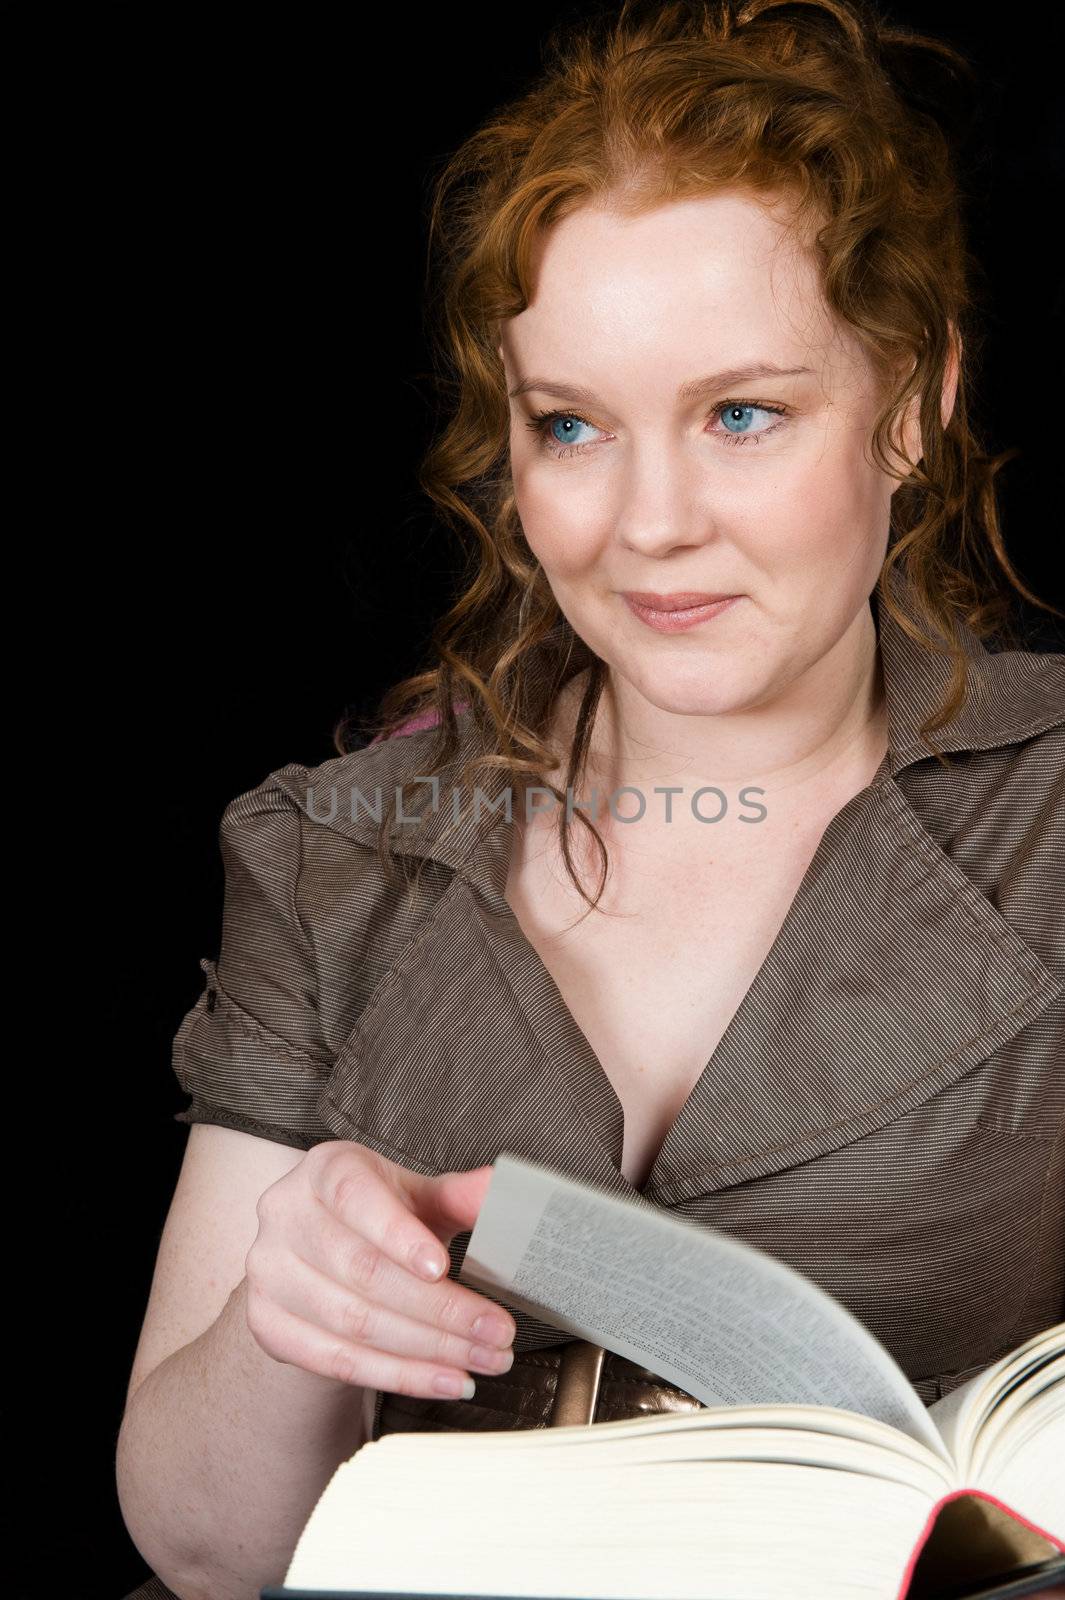 reading girl distracted from her work and studies